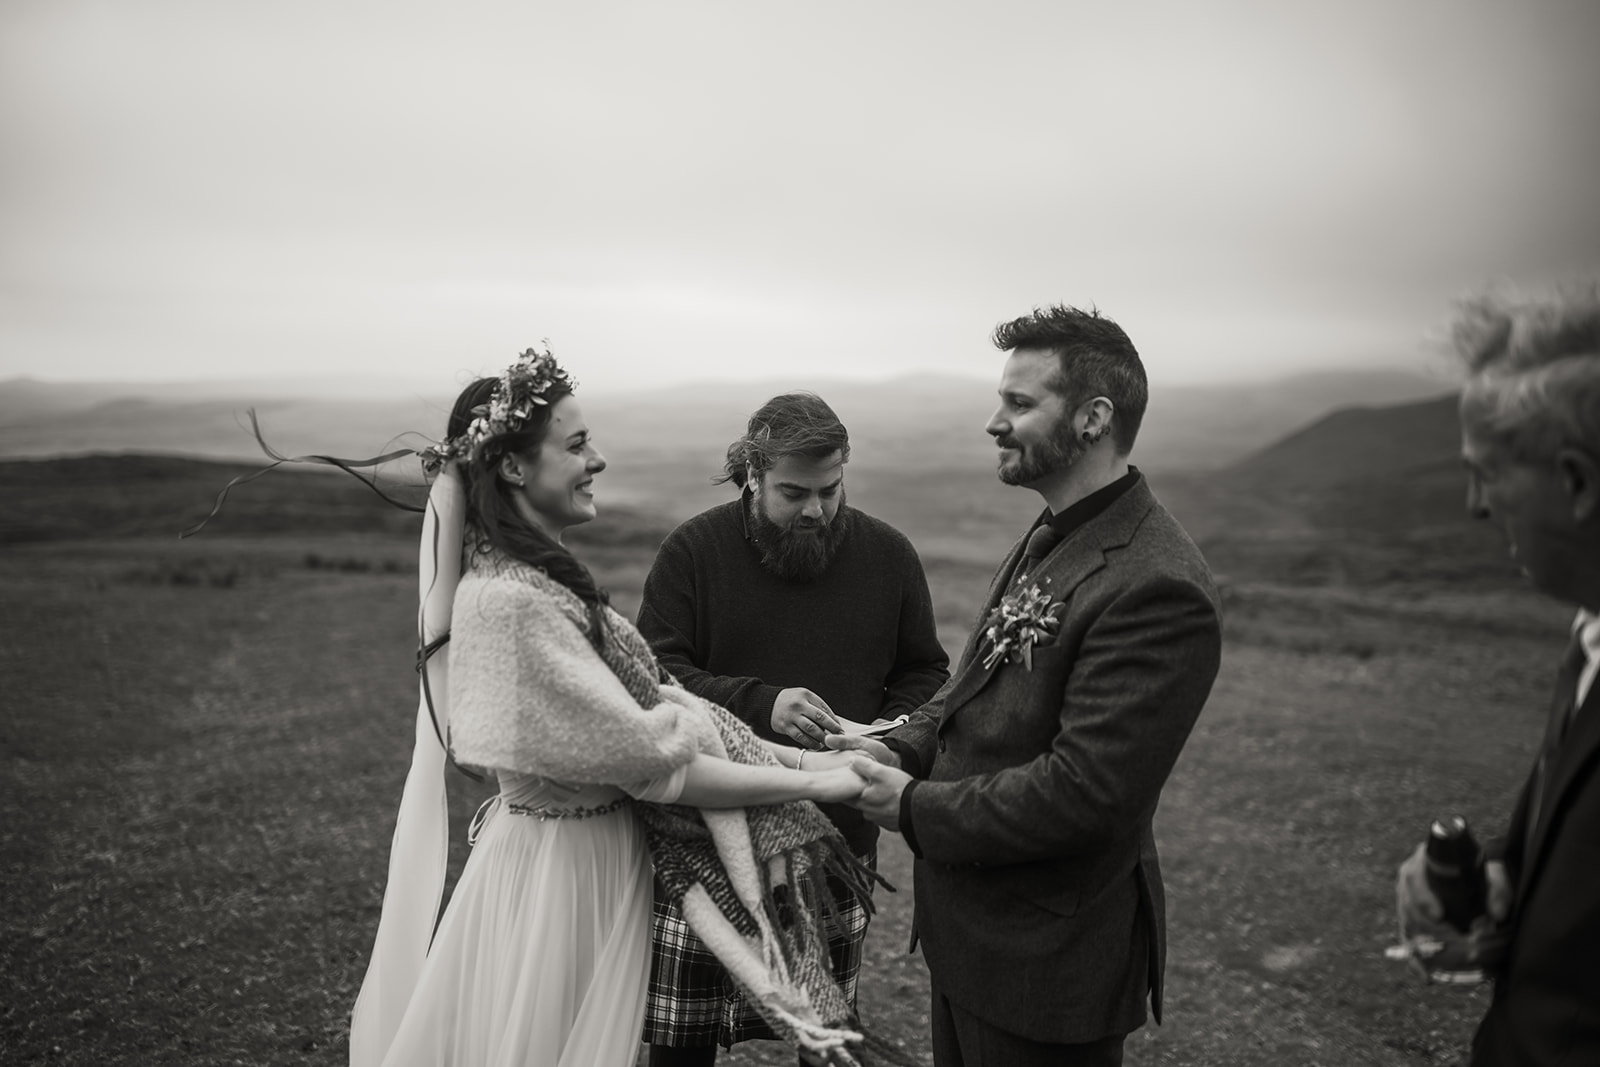 A moment of pure connection: Becca and Nick exchange vows amidst the stunning natural beauty of the Isle of Skye.